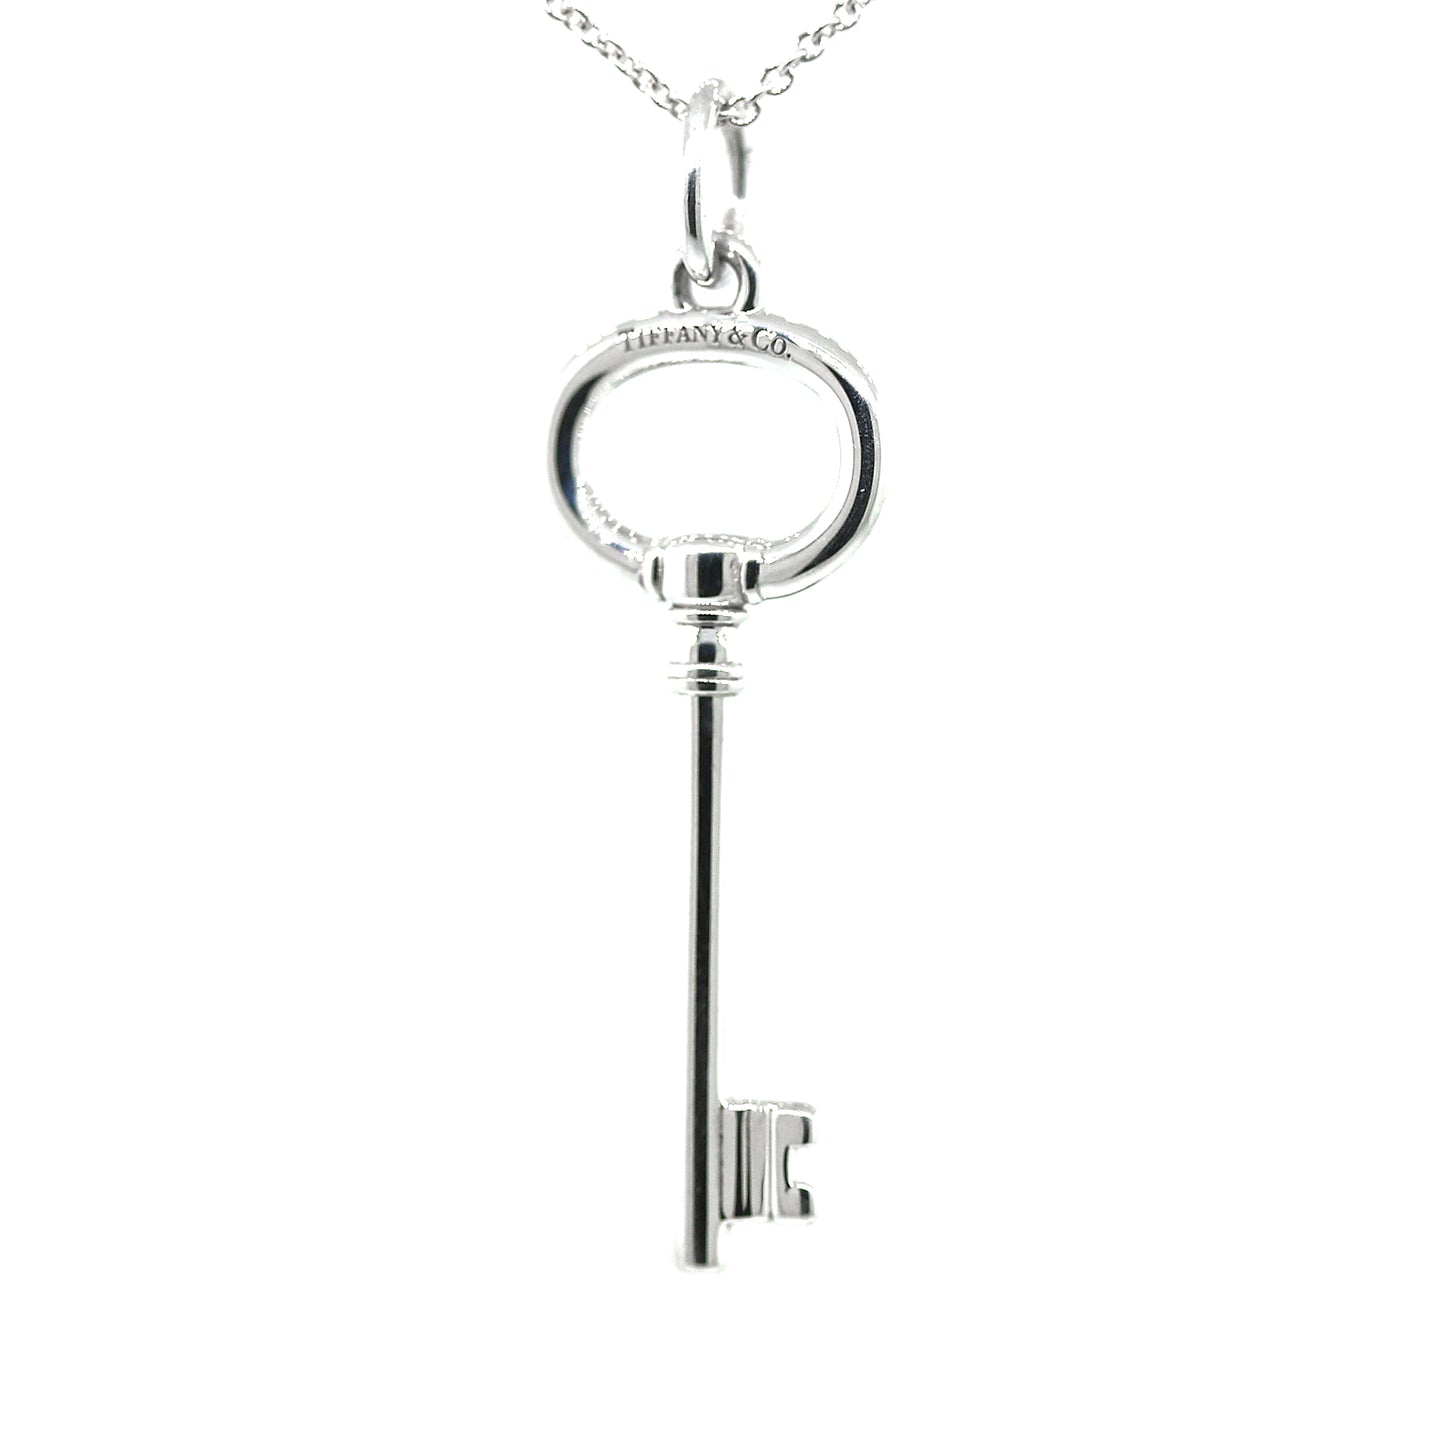 Tiffany and Co. Keys Necklace in Sterling Silver